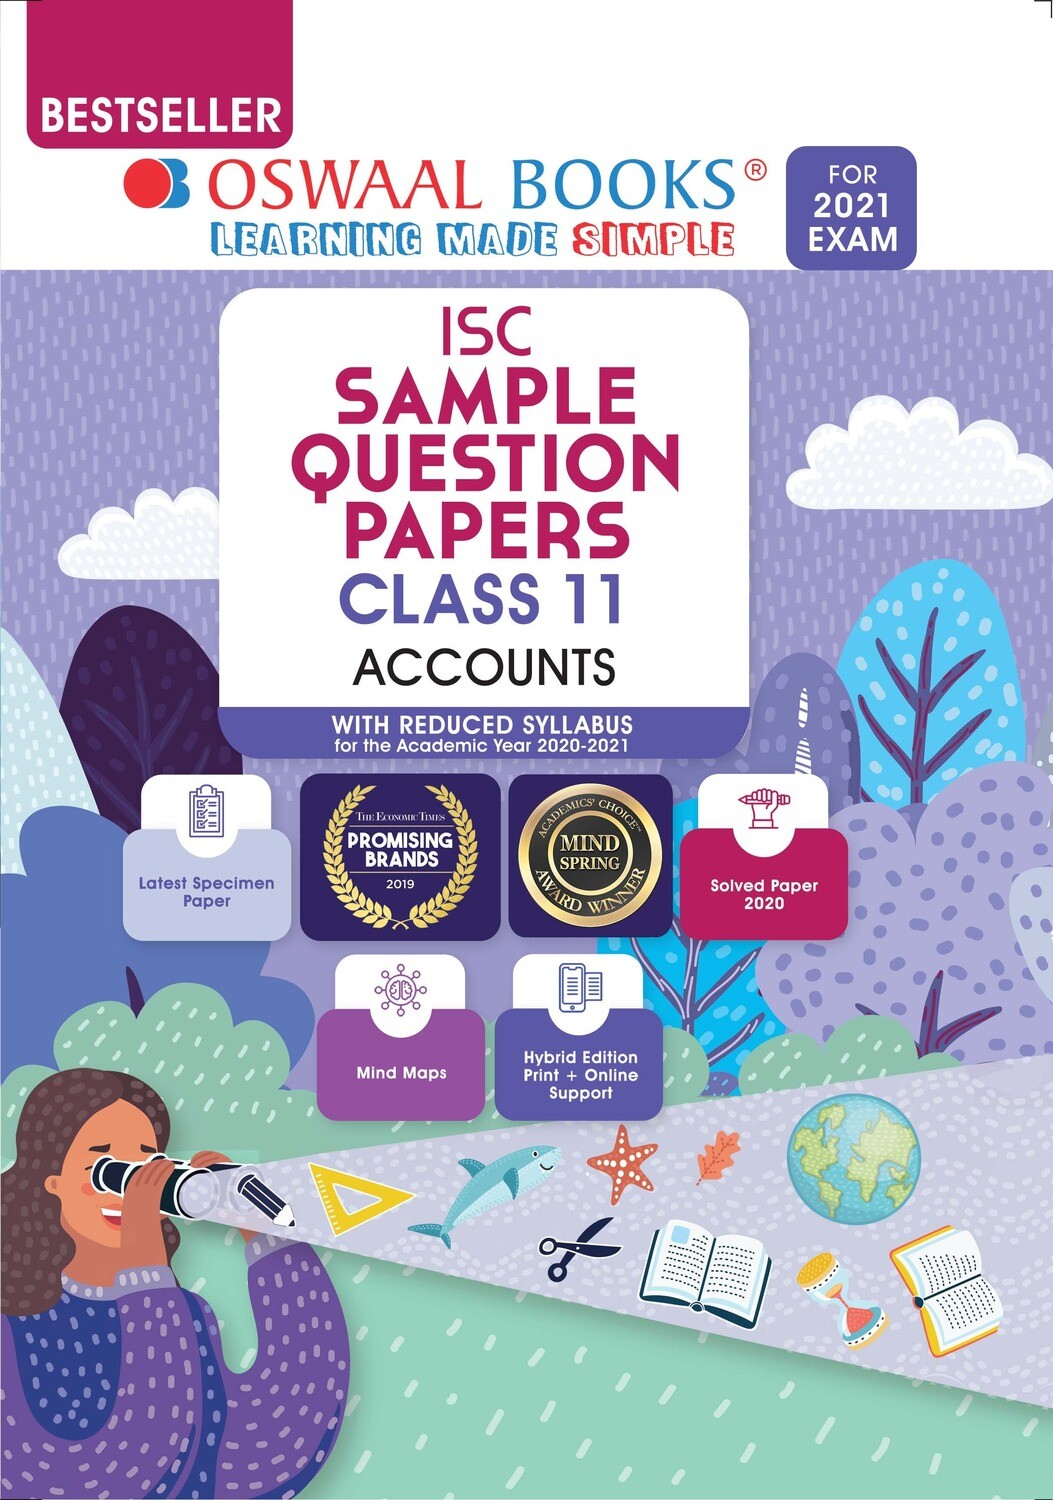 Buy e-book: Oswaal ISC Sample Question Paper Class 11 Accountancy (For 2021 Exam): 9789354230578